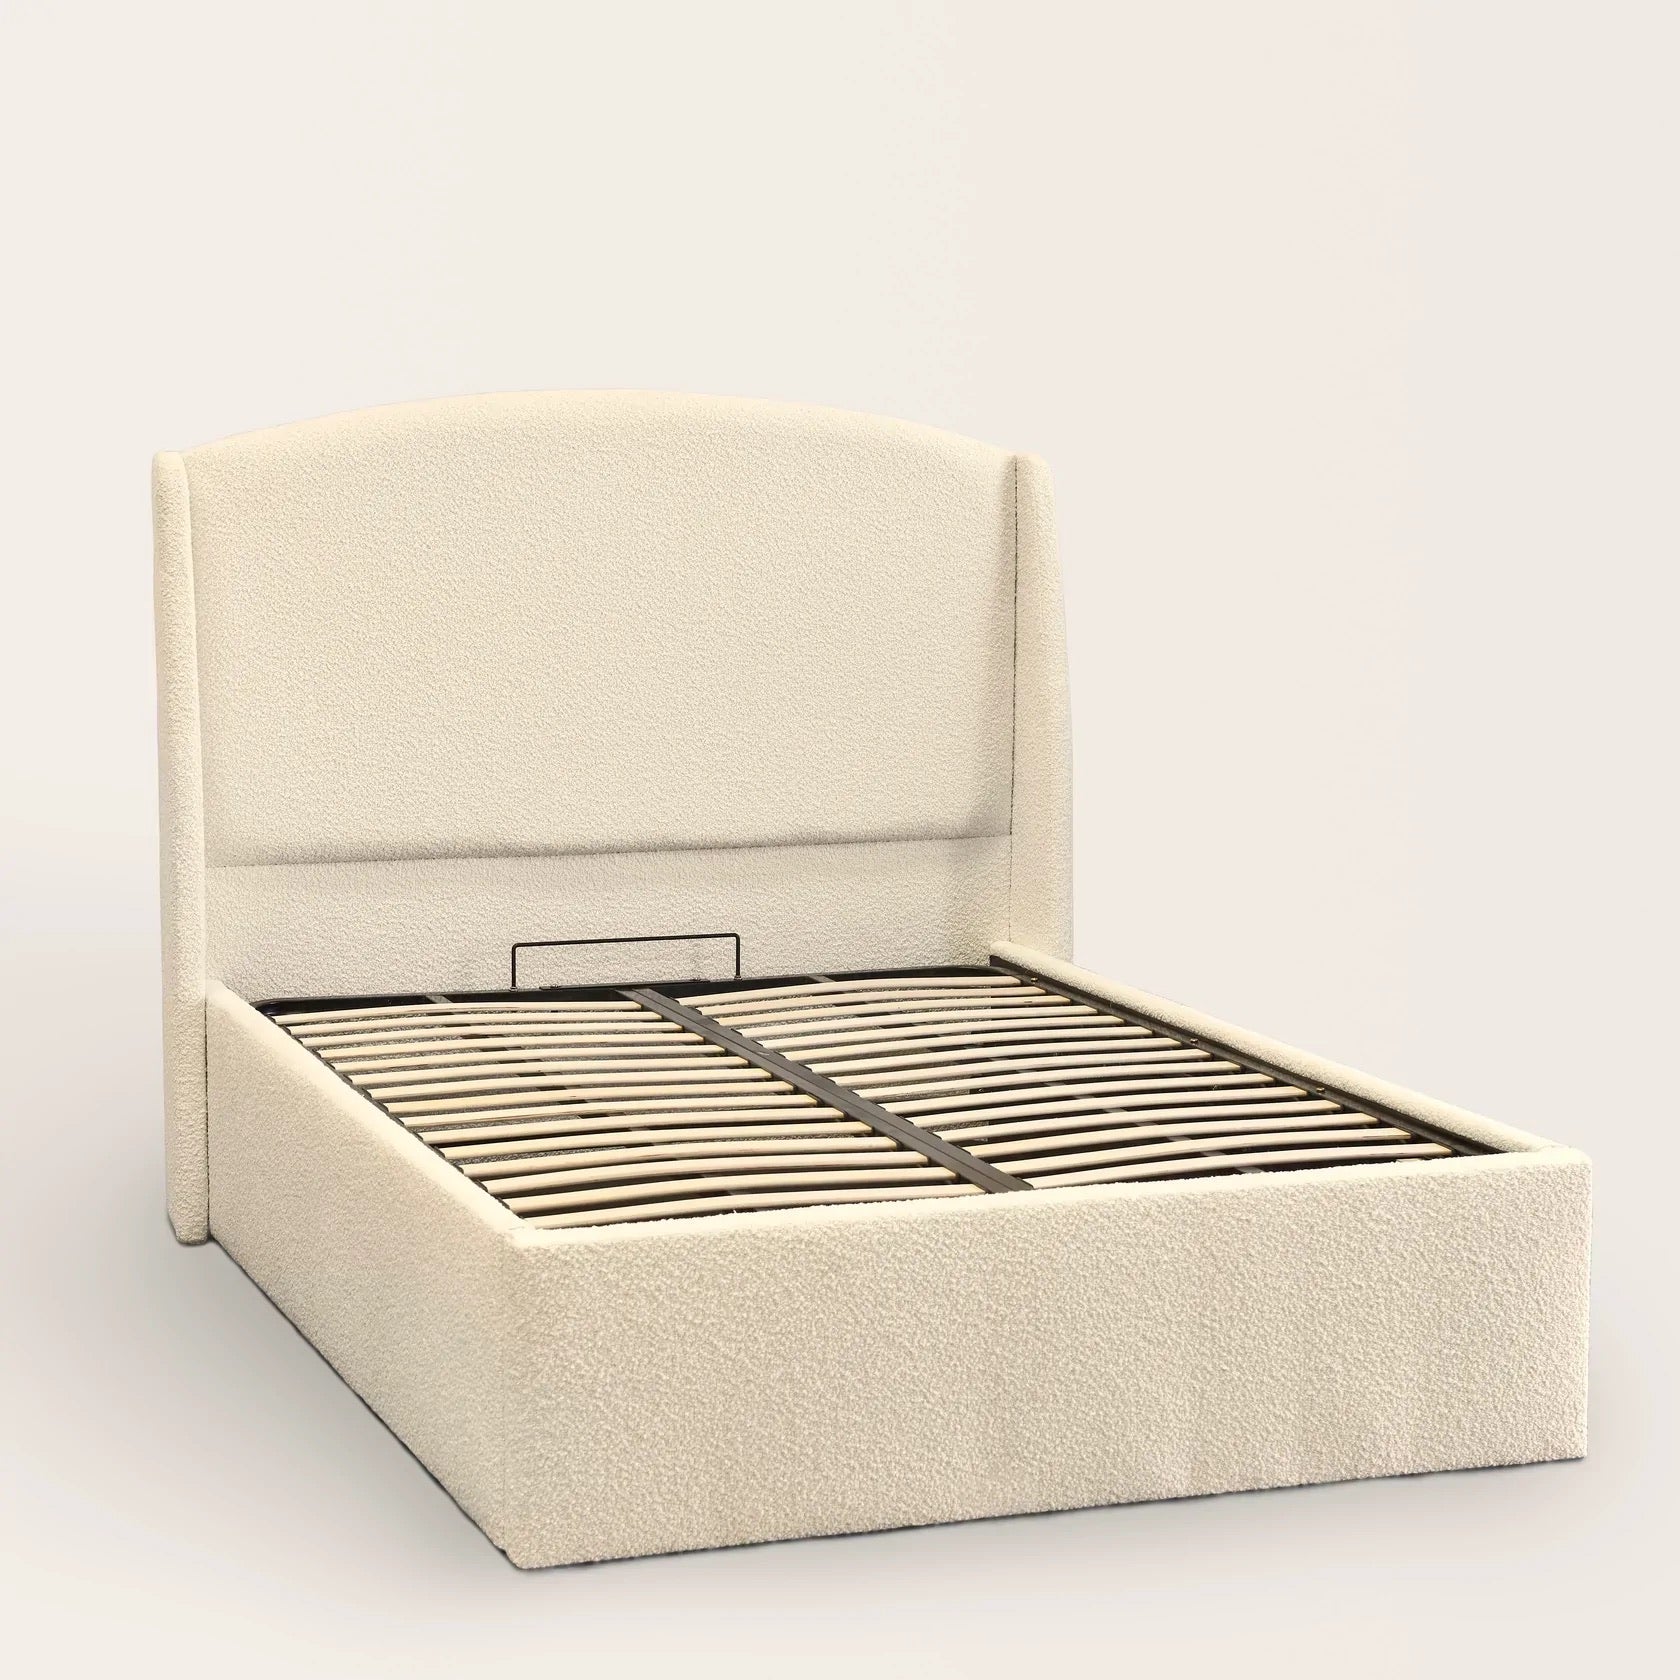 The Bespoke Brooklyn Boucle II Bed-Fully Customisable with Storage Options- Boucle Range